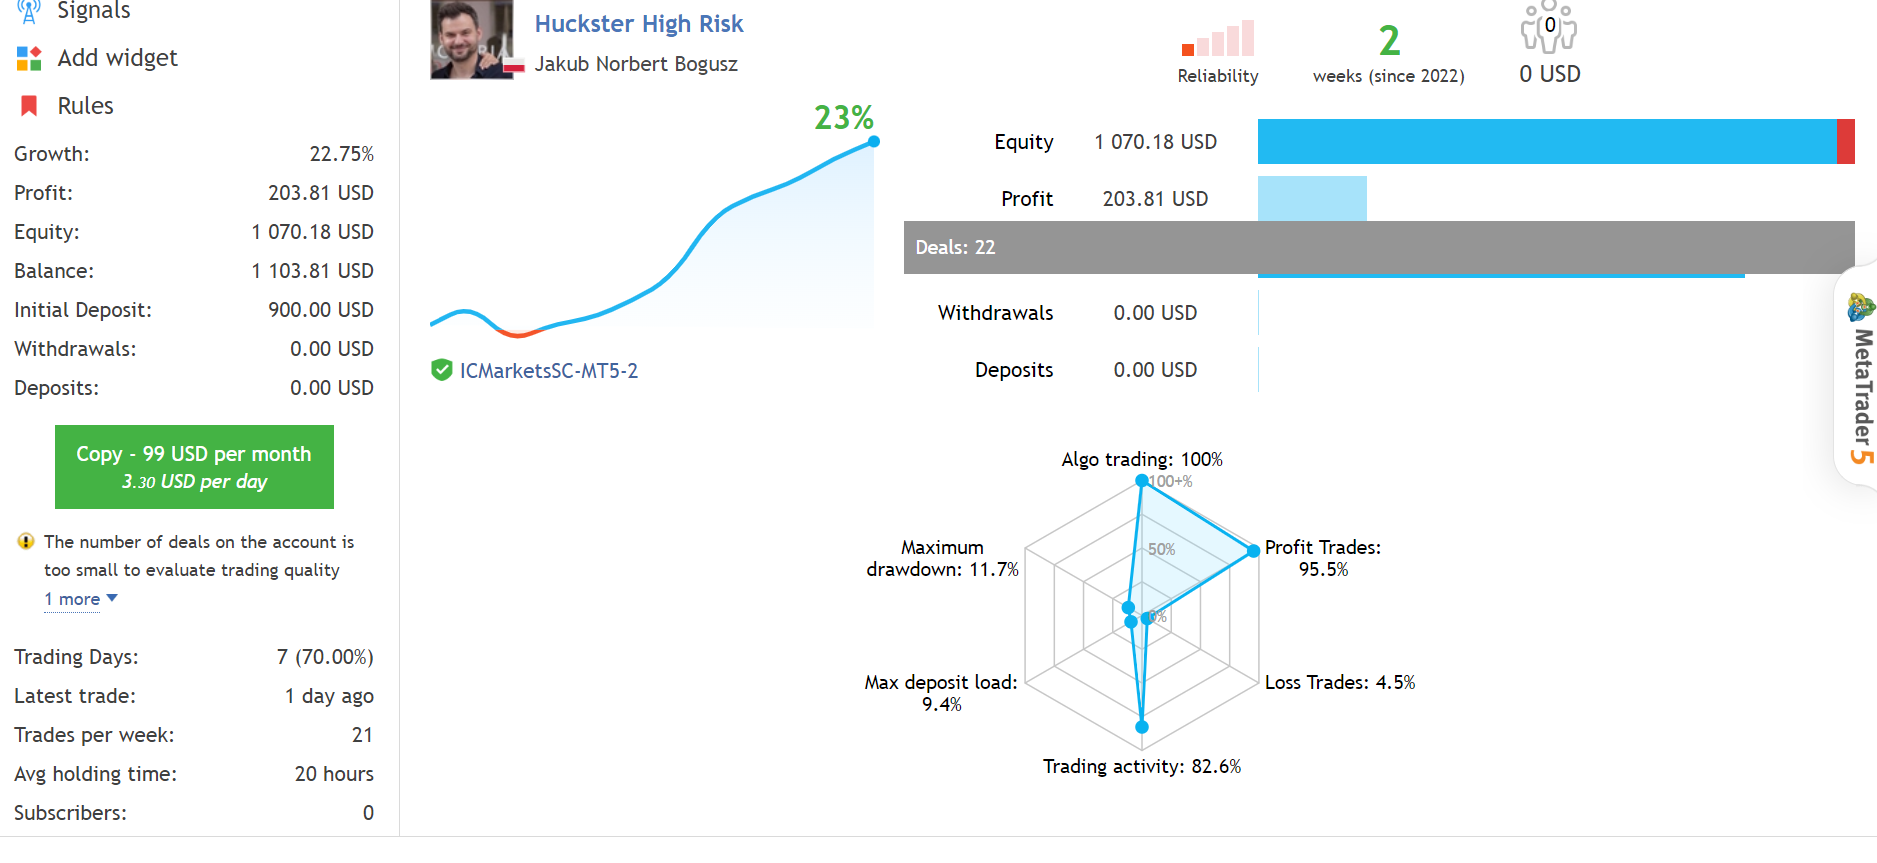 Huckster live trading results.